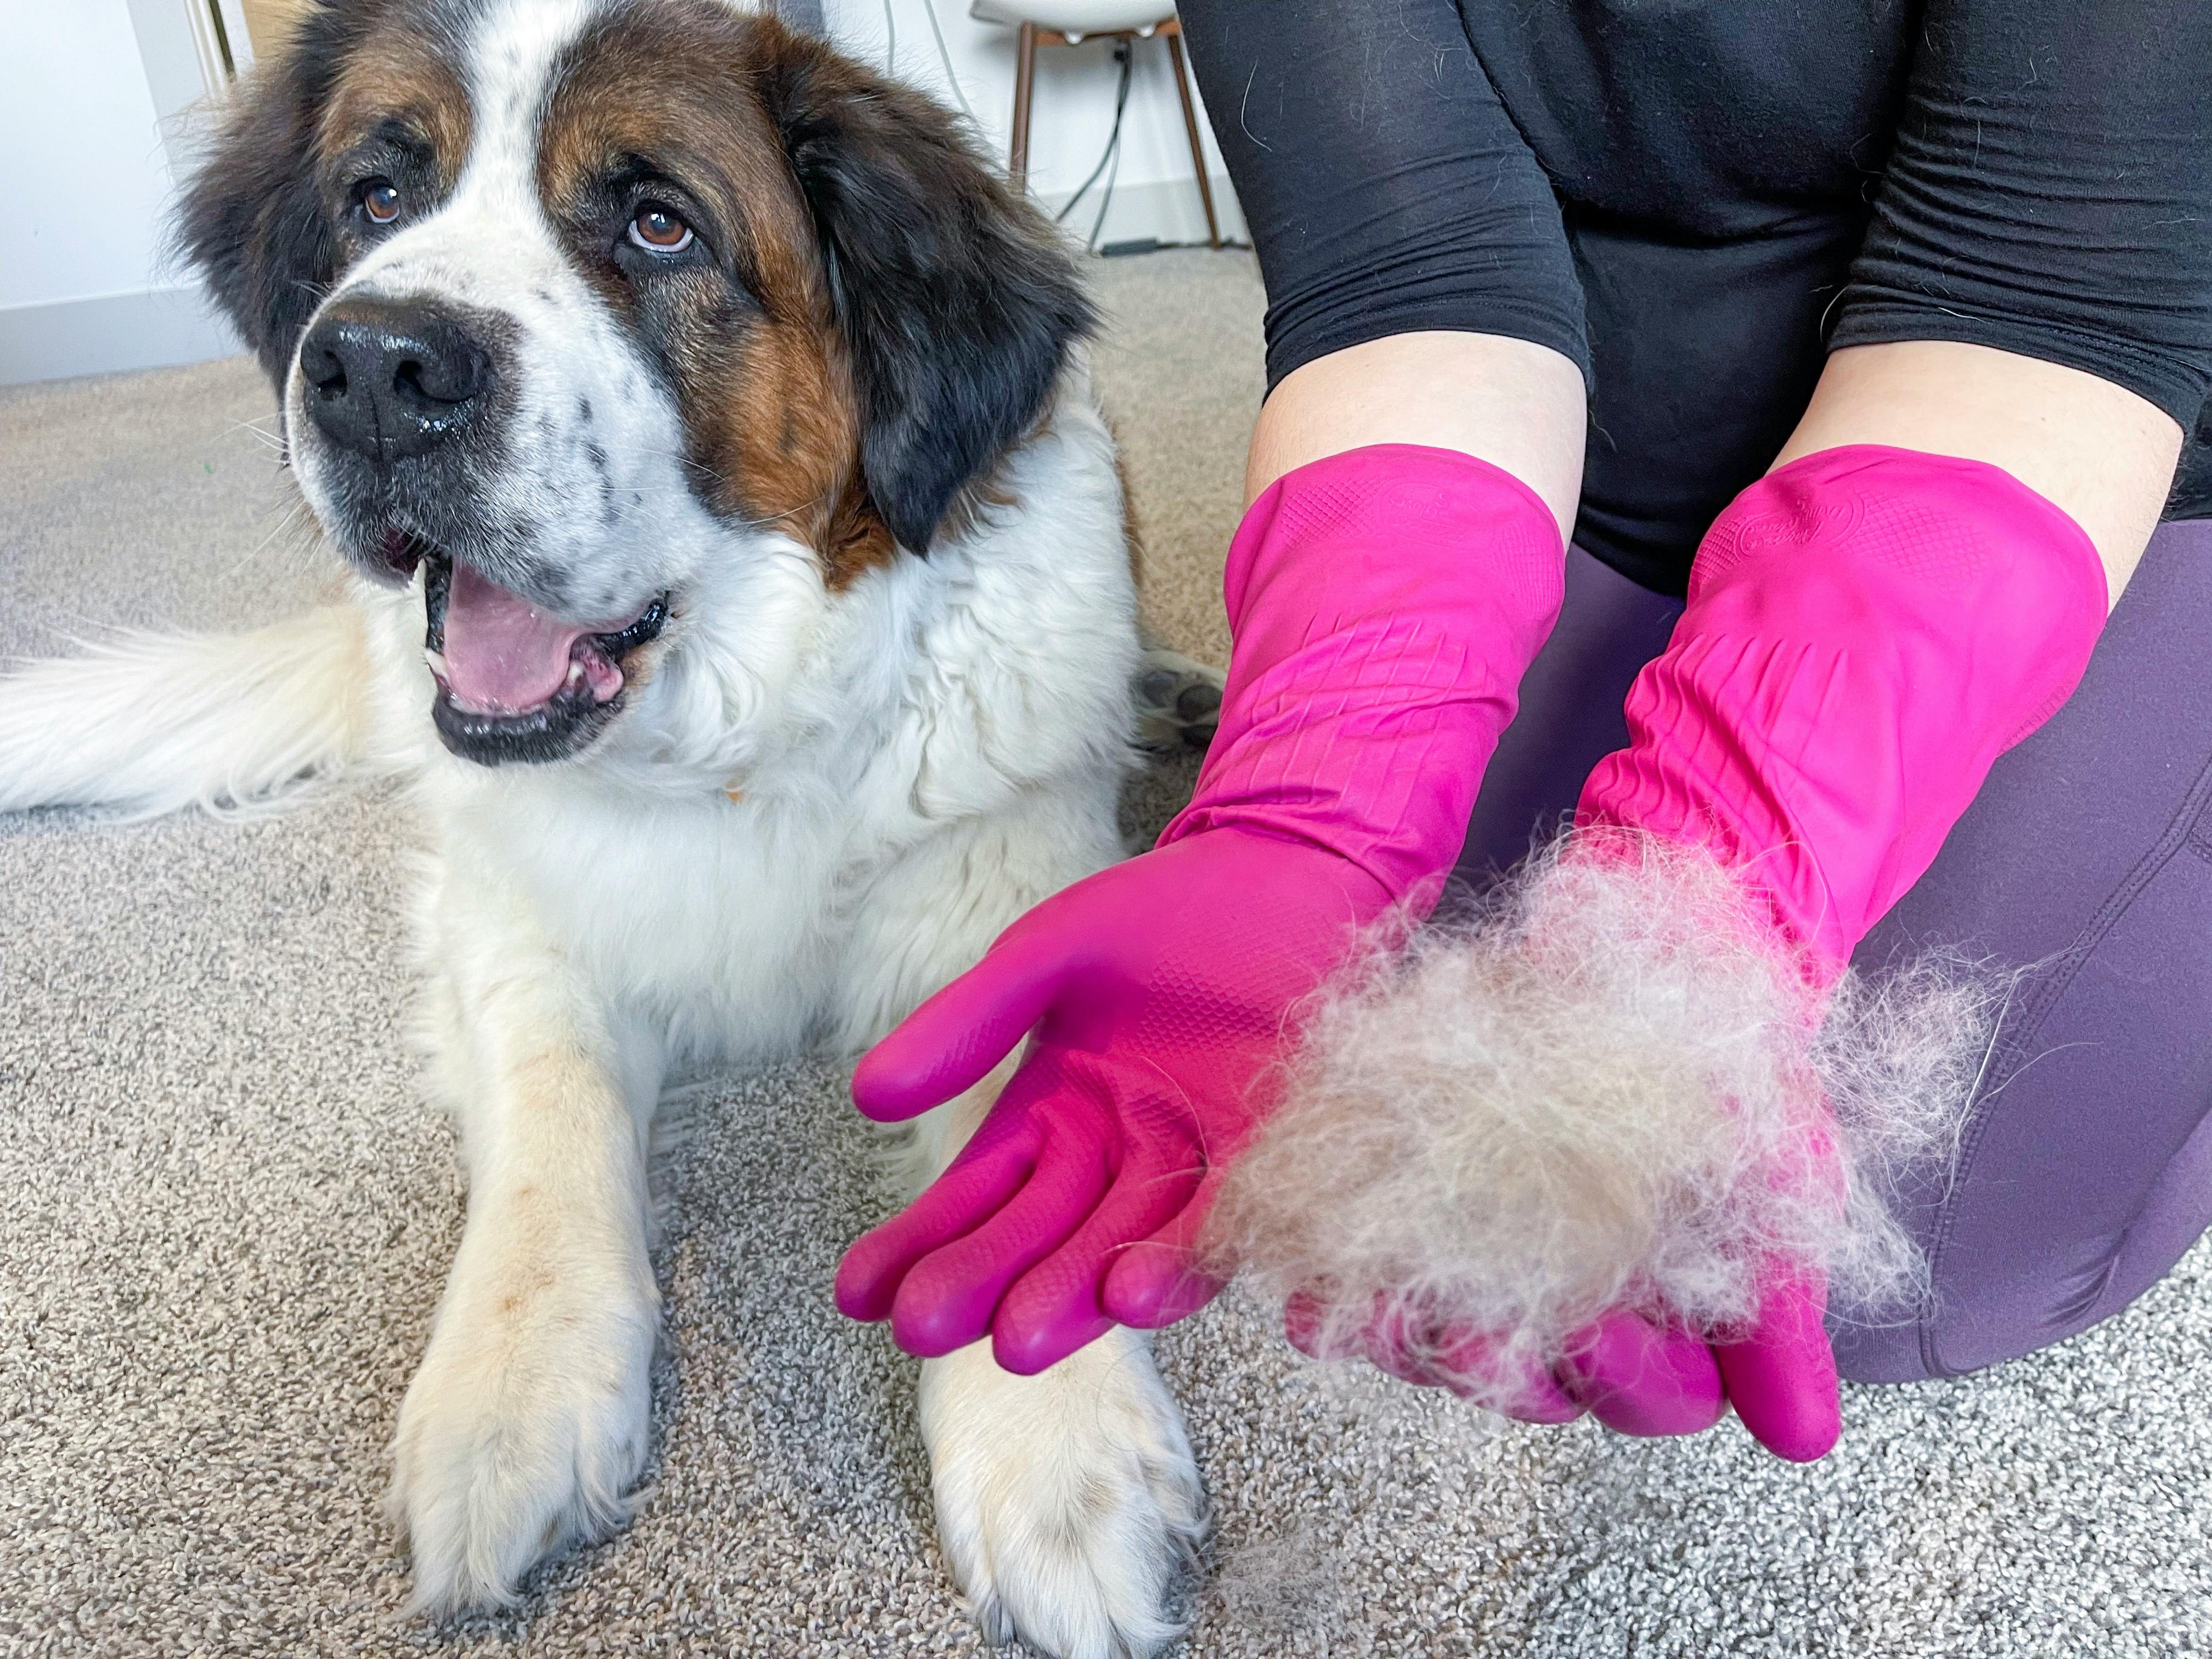 How to Get Rid of Pet Hair - 4 Tips for Cleaning Up Dog and Cat Hair